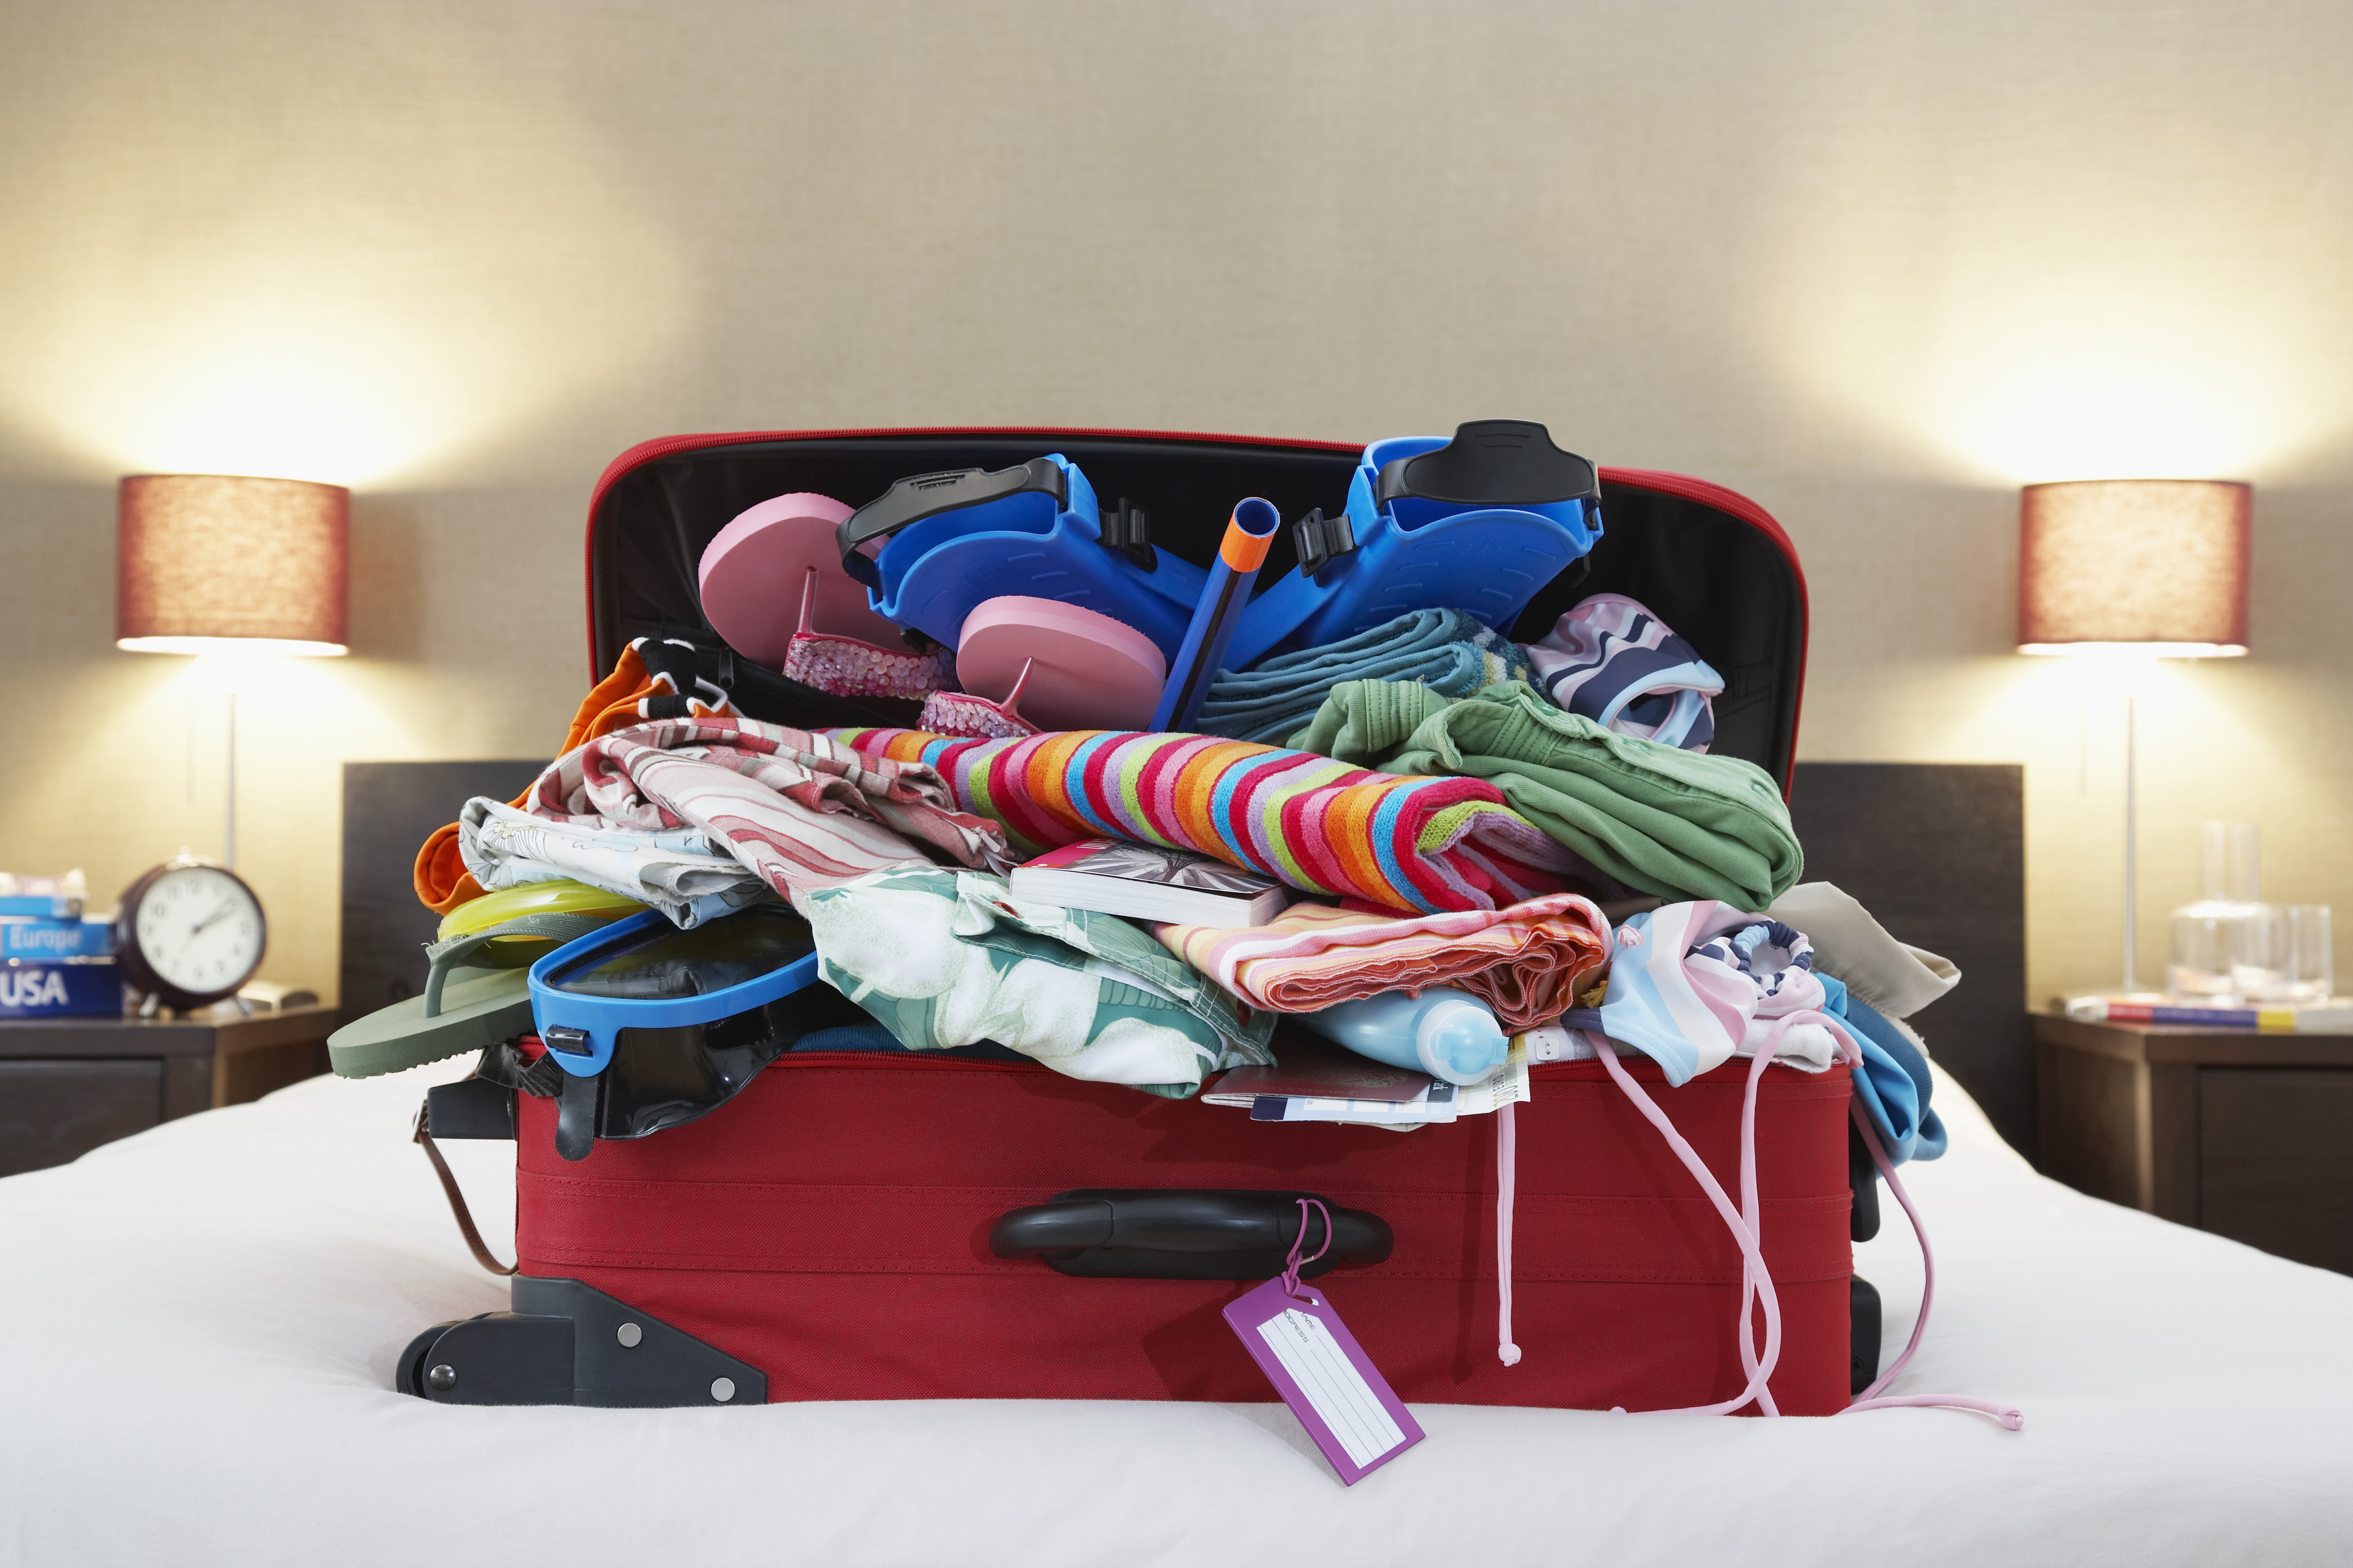 11 Packing Hacks That Will Change the Way You Travel